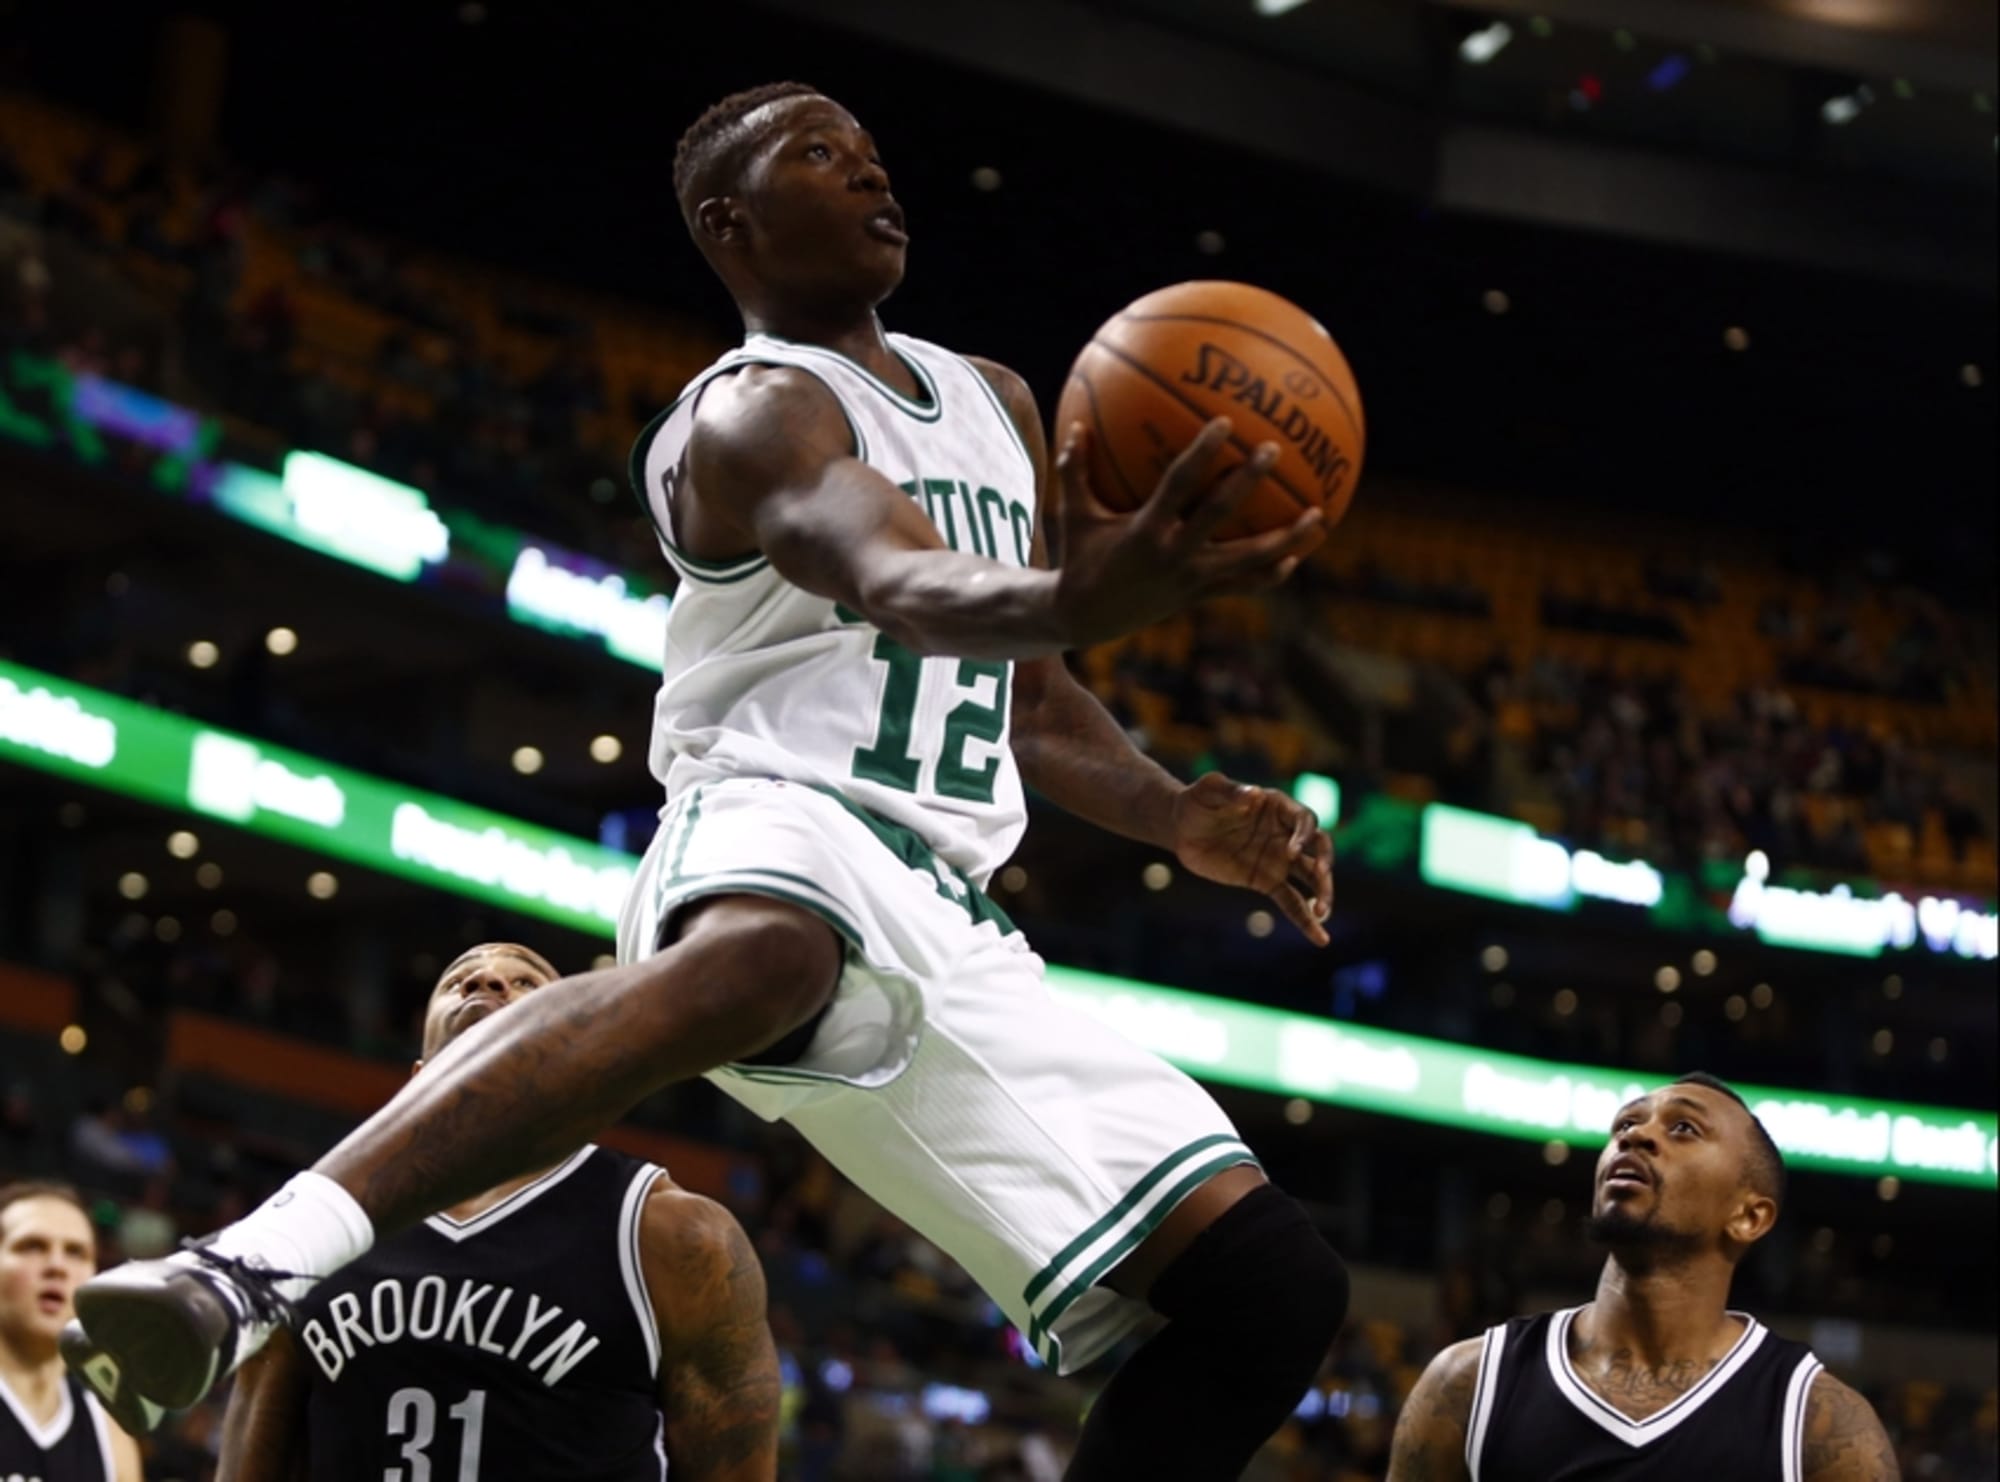 Watch: Rozier shouts 'This is my city' after draining three